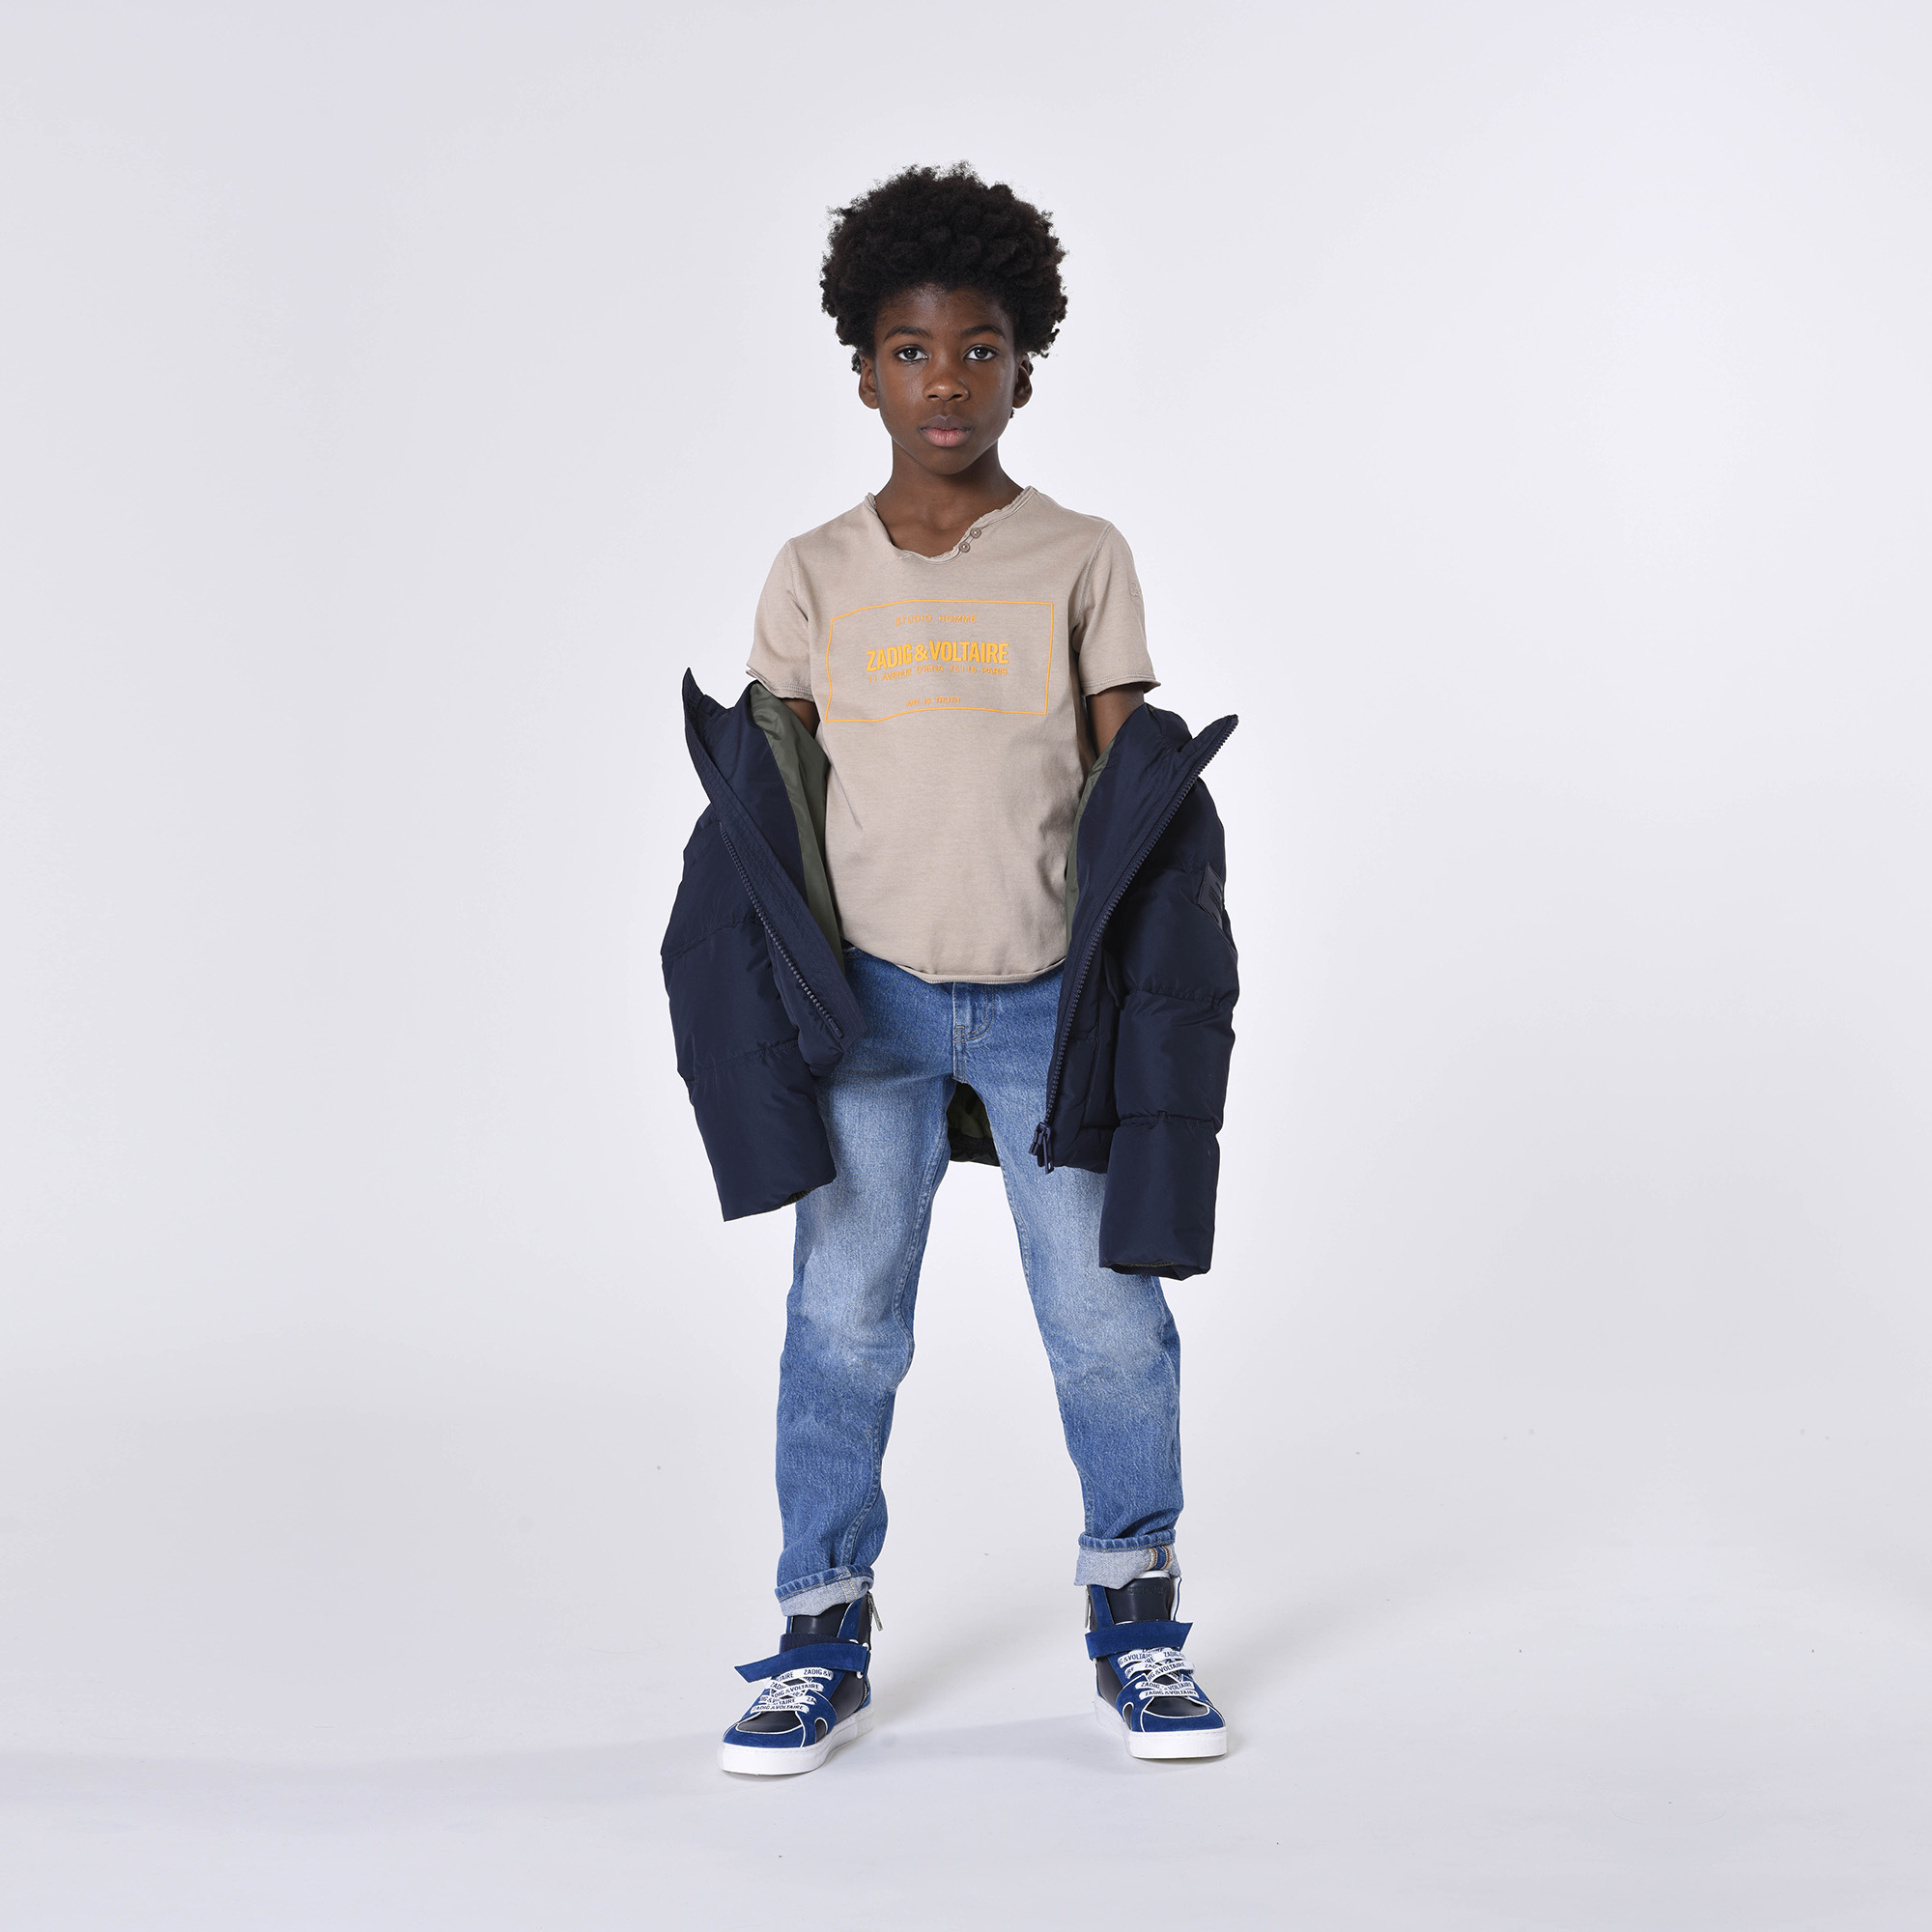 Hooded parka ZADIG & VOLTAIRE for BOY